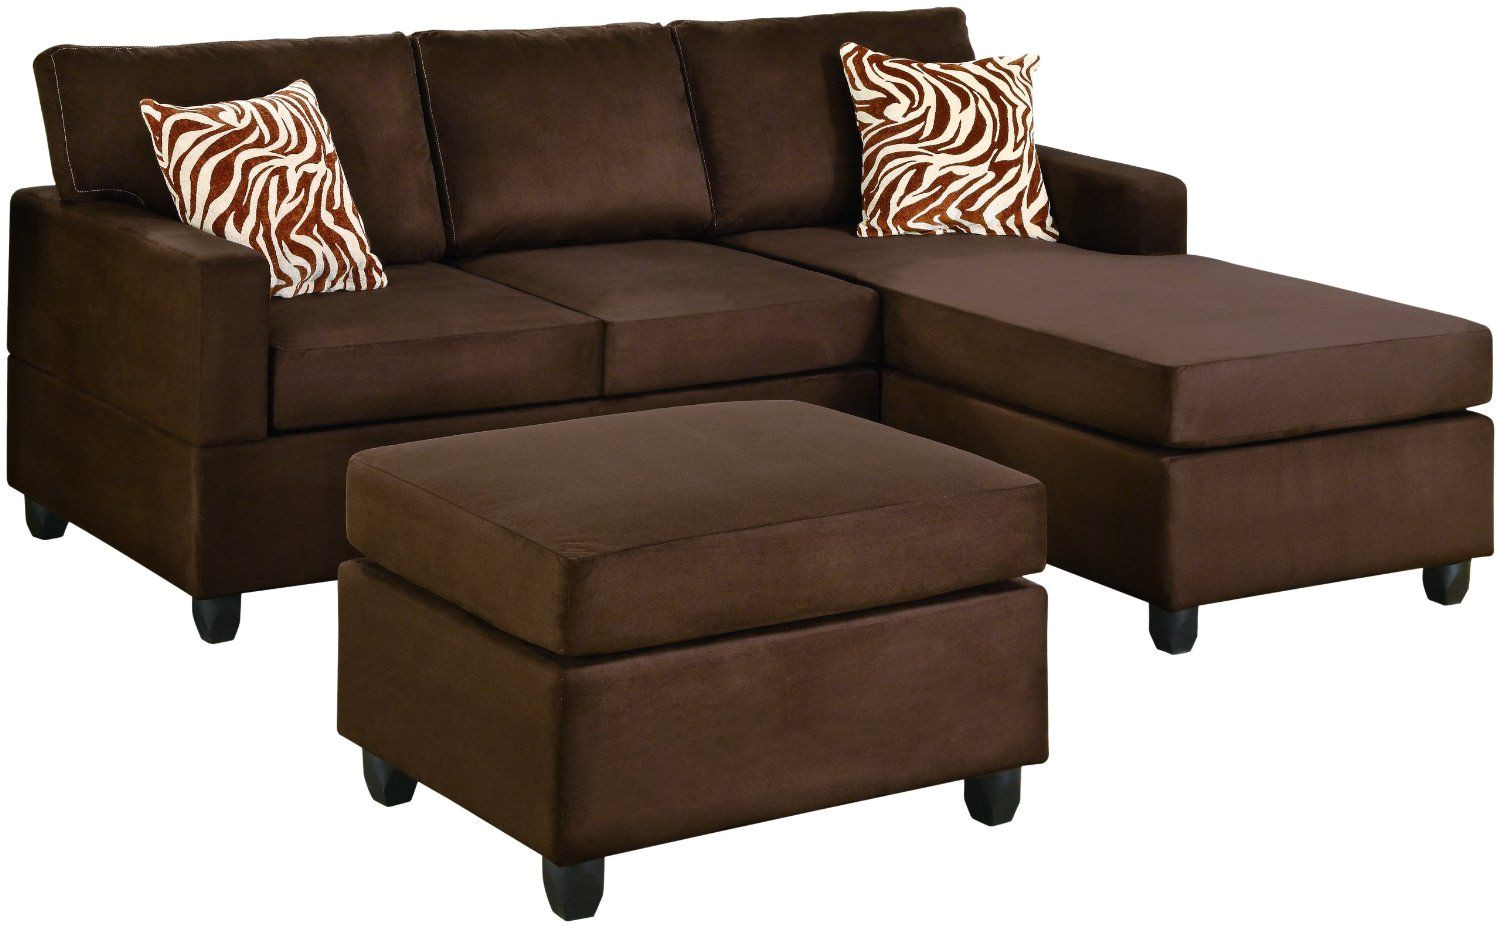 the outrageous amazing sectional sofas with chaise lounge and ottoman picture